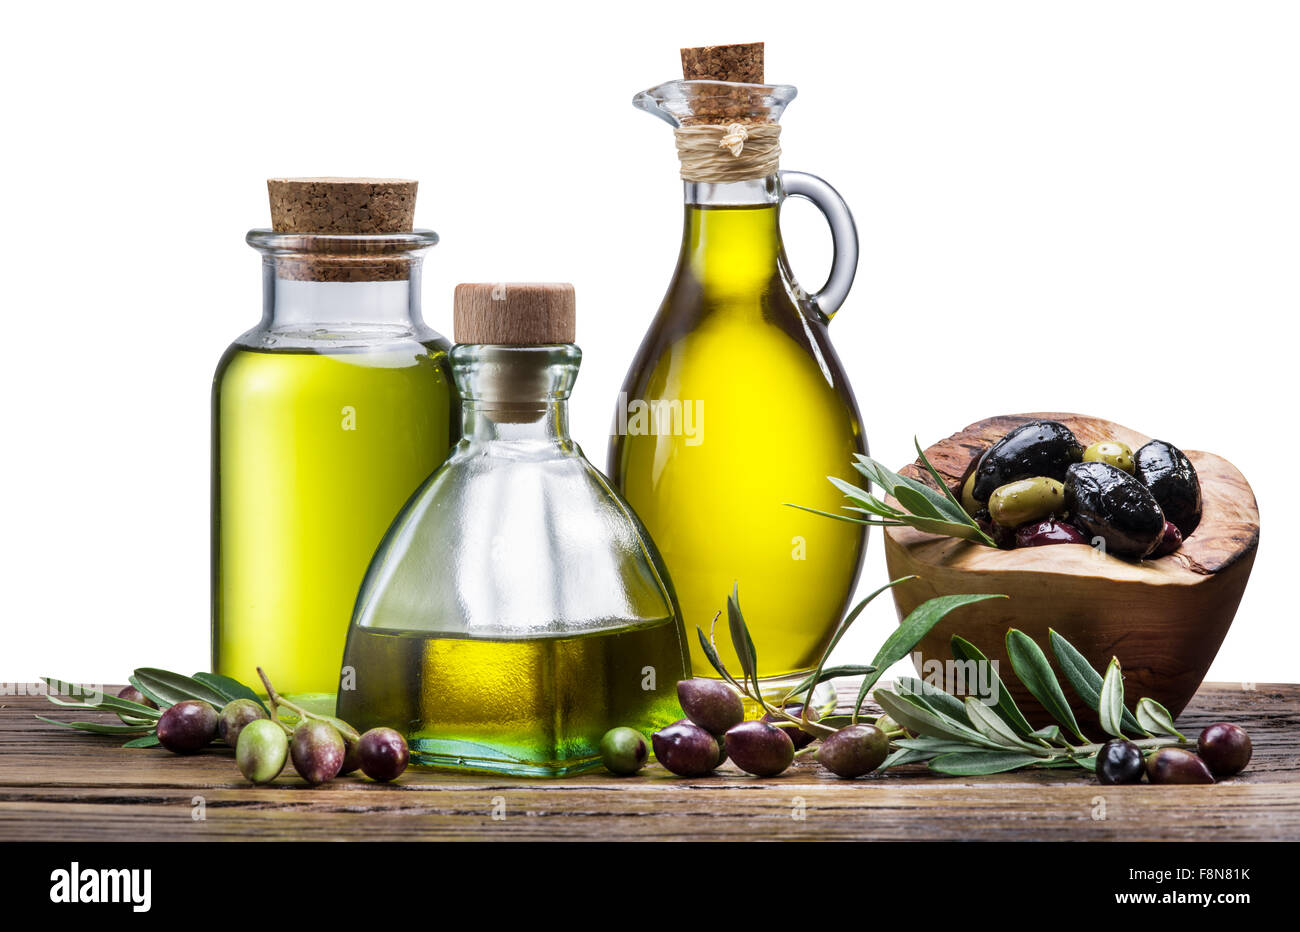 Olive oil and berries on the wooden table. white background. File contains clipping paths. Stock Photo